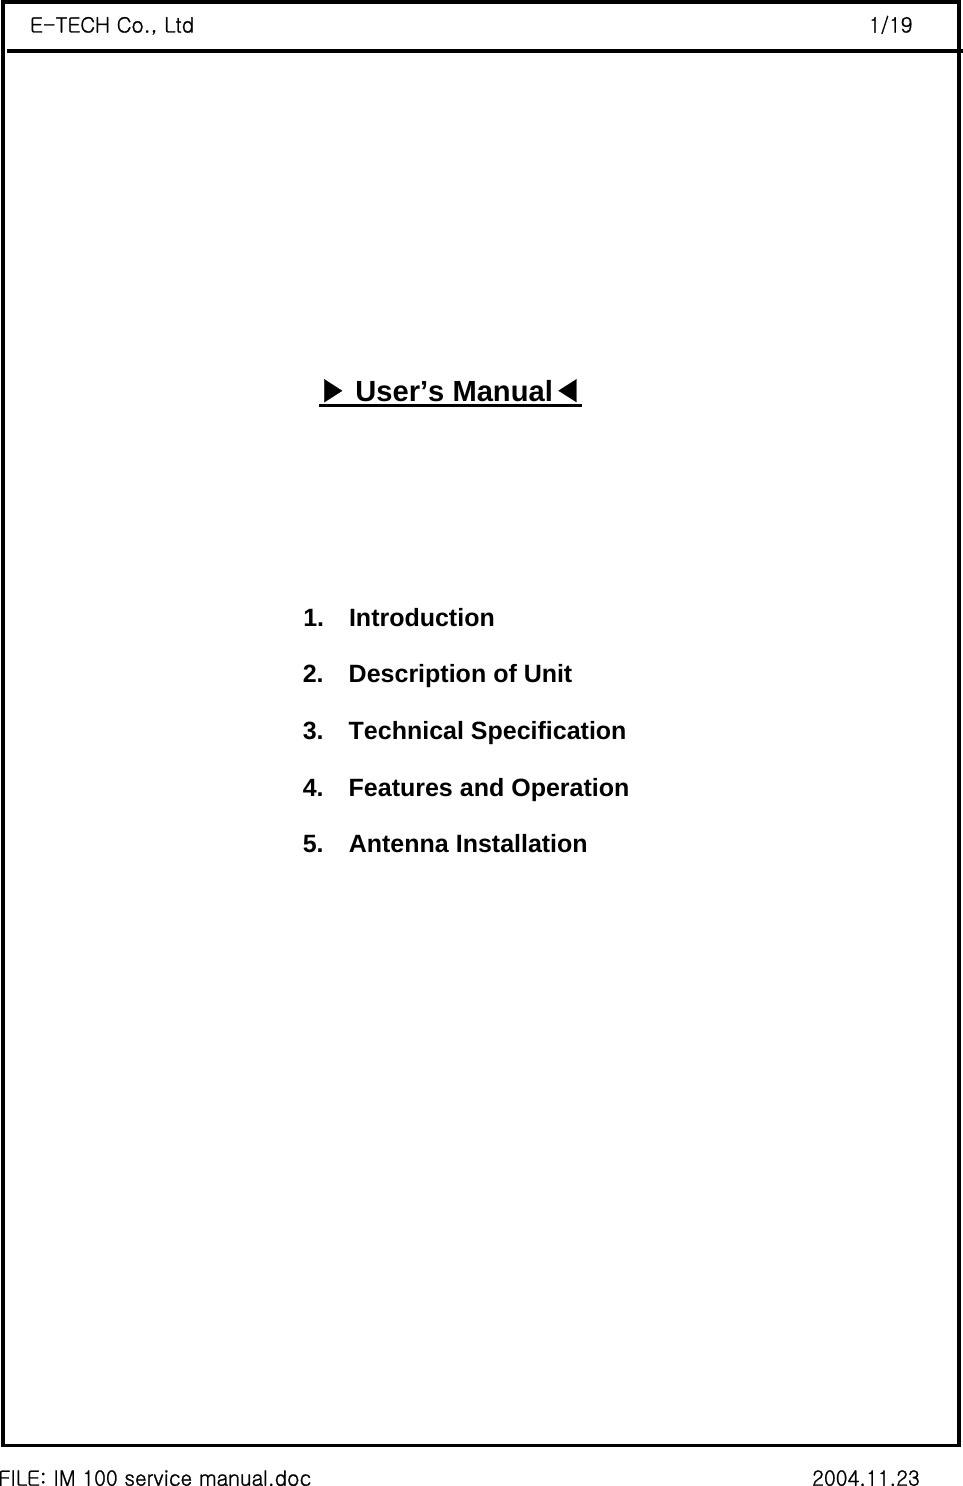  FILE: IM 100 service manual.doc                                                 2004.11.23 E-TECH Co., Ltd                                                                  1/19        ▶User’s Manual◀                              1.  Introduction 2.    Description of Unit 3.  Technical Specification 4.    Features and Operation 5.  Antenna Installation             